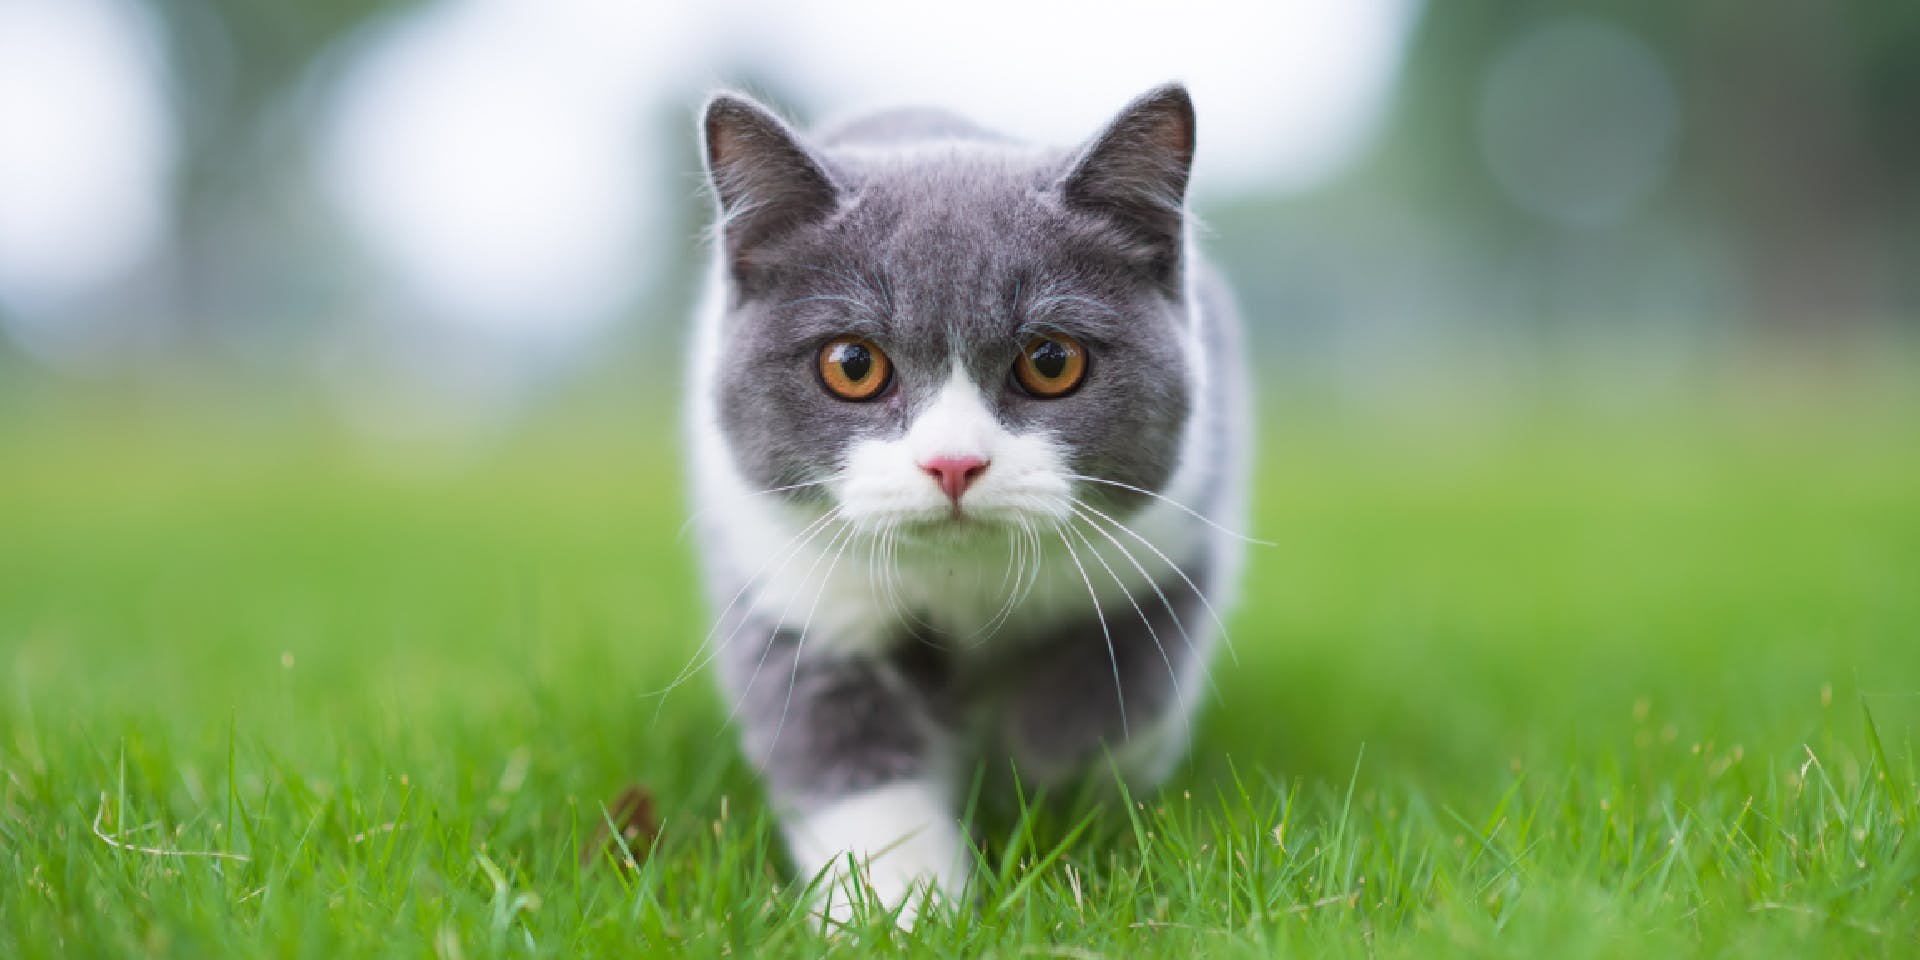 A gray and white cat walking in the garden.